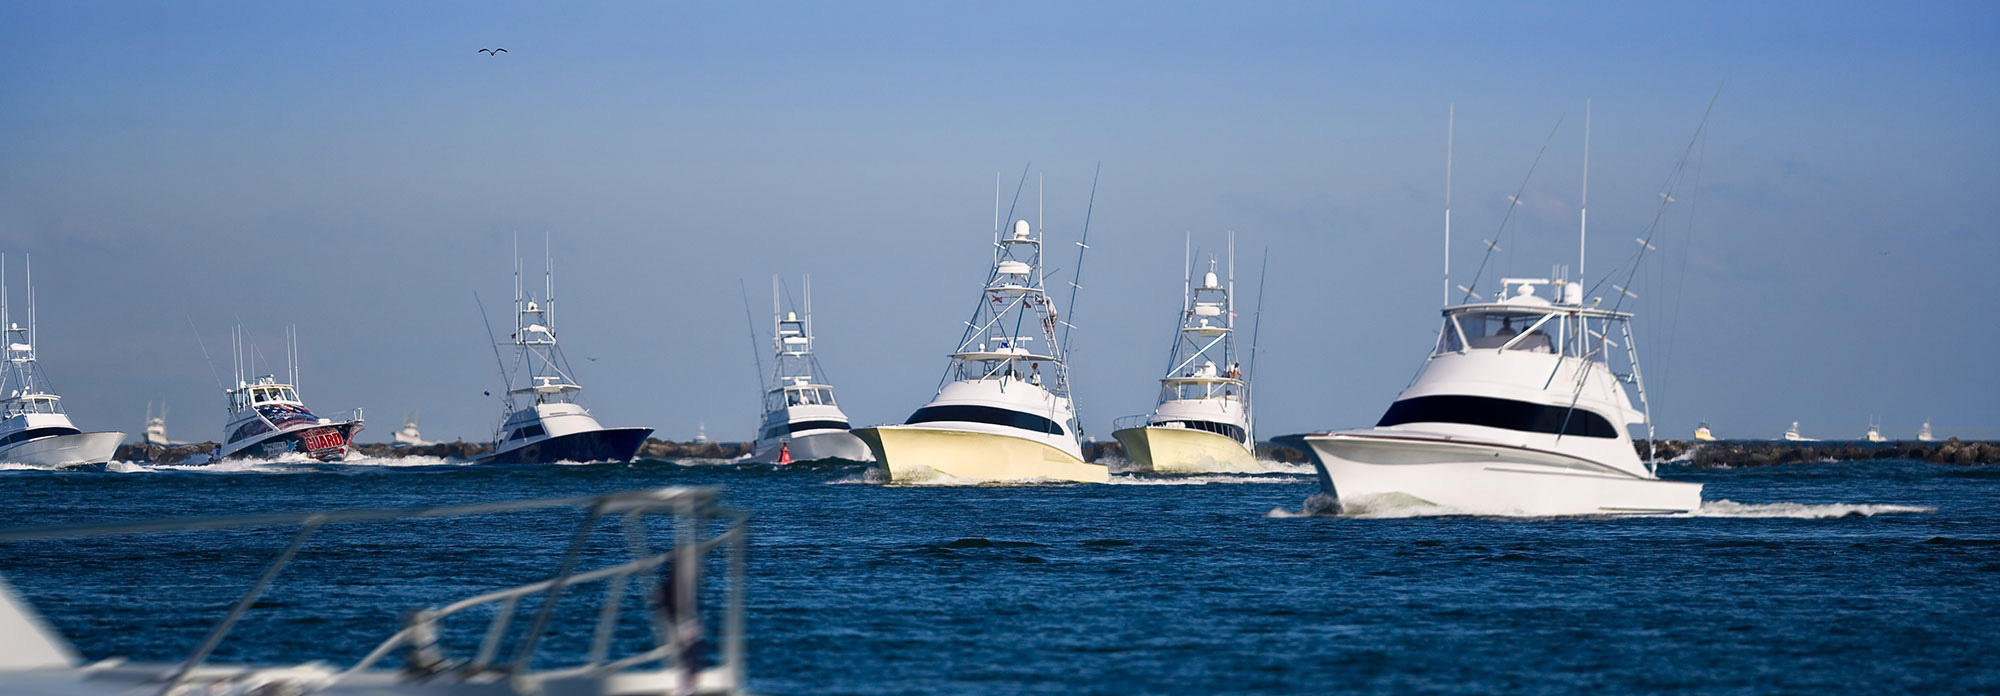 multiple offshore fishing boats in ocean city inlet